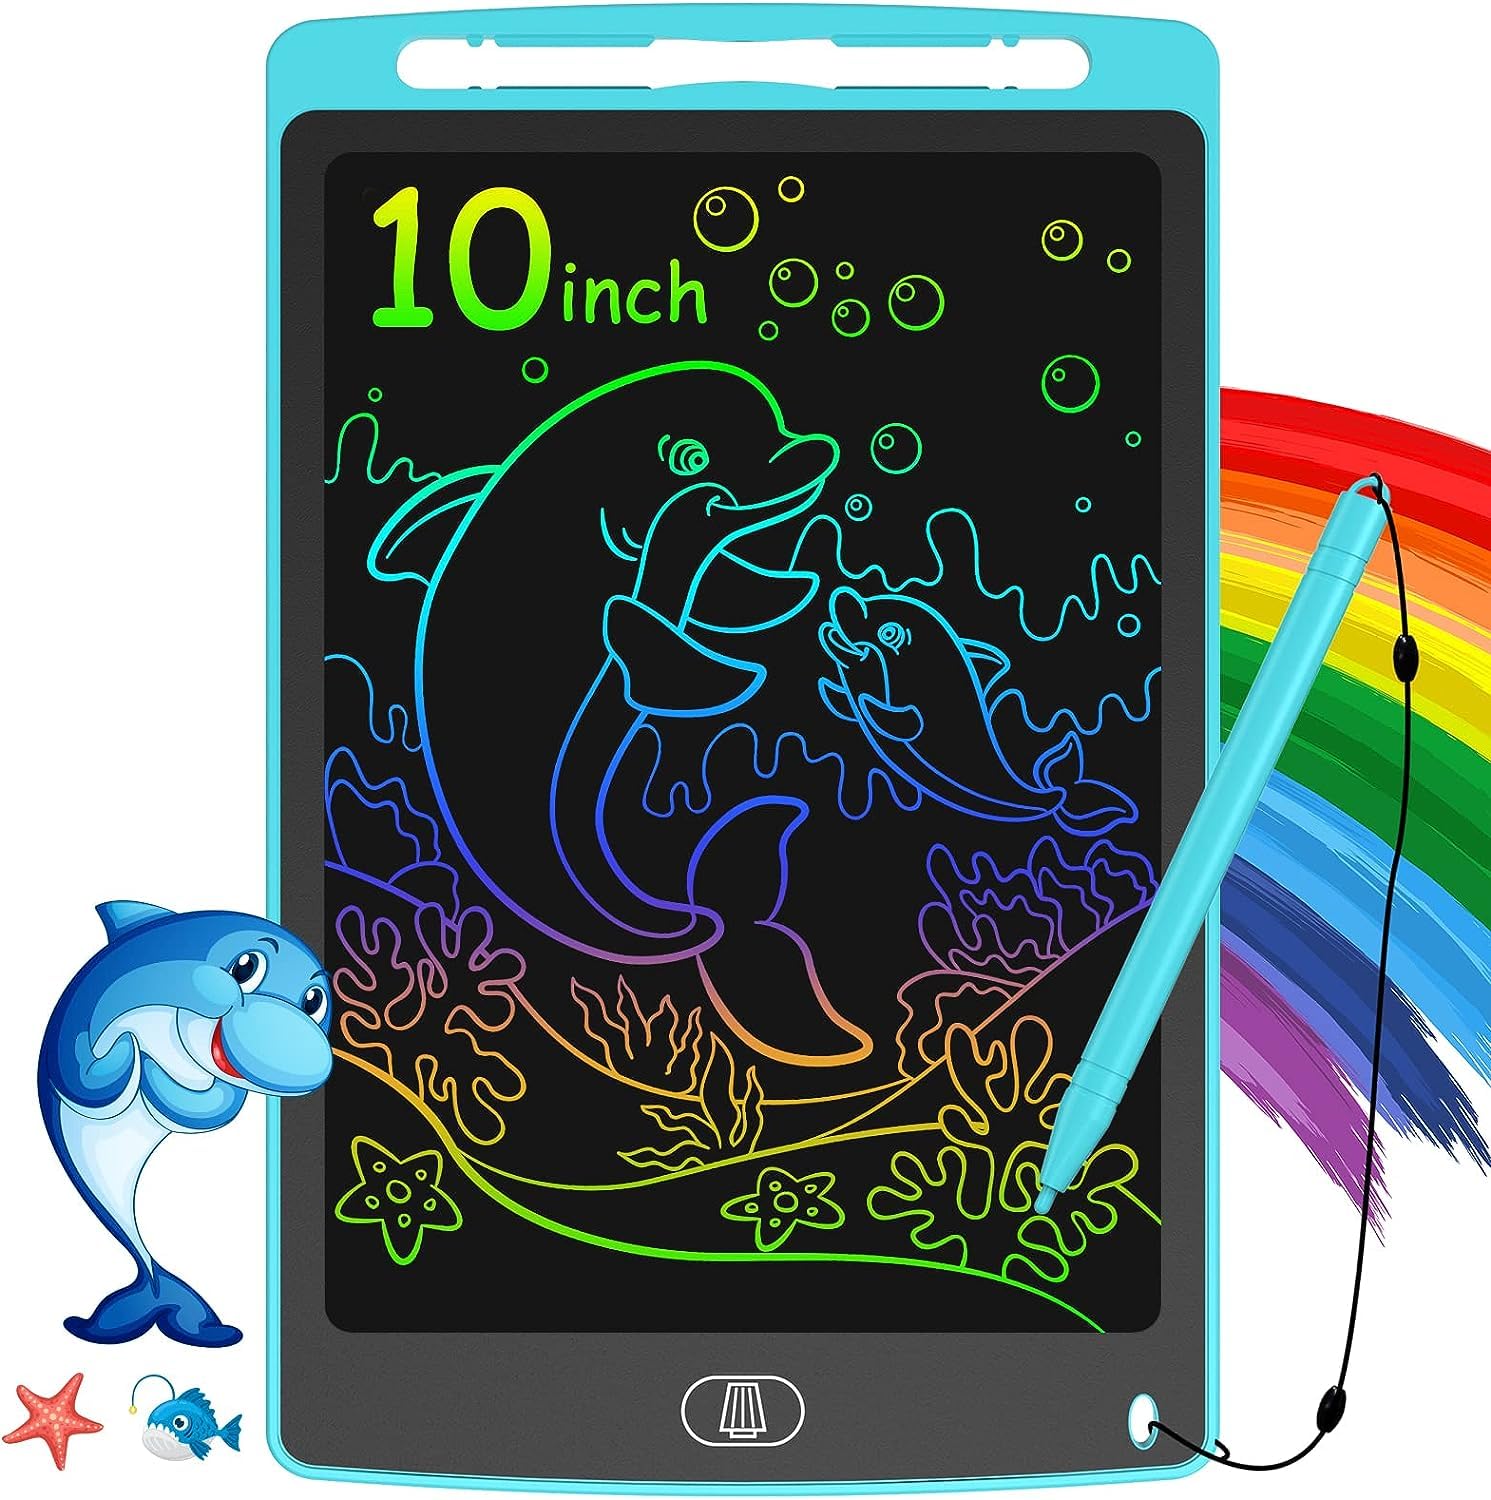 Tvara 10.5 inch LCD Writing Board Kids Learning Toys, Doodle Board Toddler Gift, Colorful Writing Board Christmas Birthday Gift for Boys and Girls 3 4 5 6 7 8 Years Erasable Reusable Drawing Board